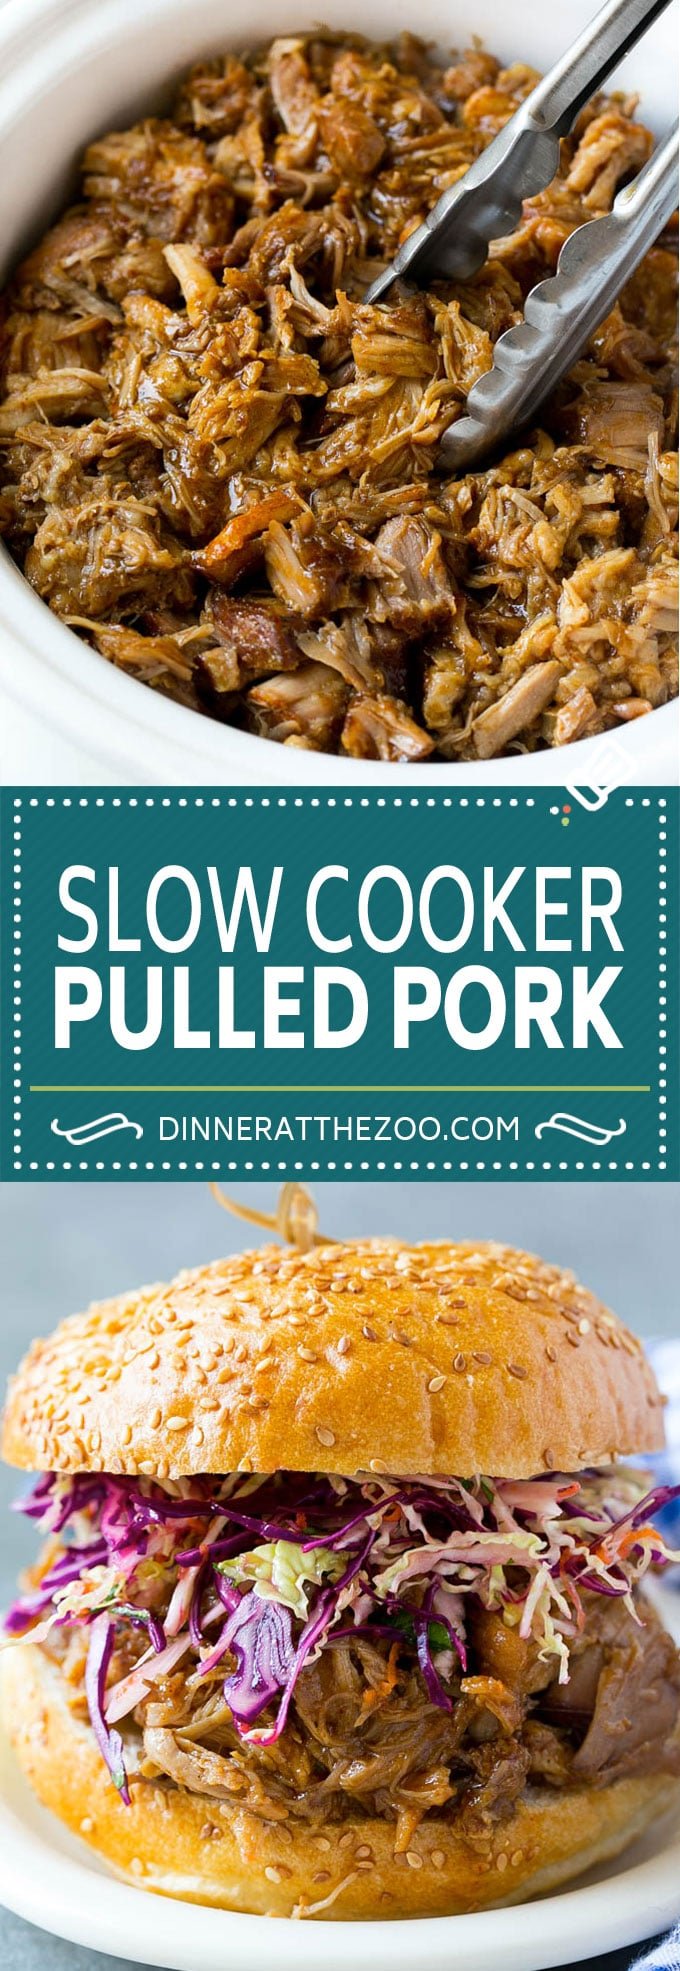 Slow Cooker Pulled Pork Sandwiches Recipe | Slow Cooker Pulled Pork | Crockpot Pulled Pork | Slow Cooker Sandwich #pork #slowcooker #crockpot #sandwich #dinner #dinneratthezoo